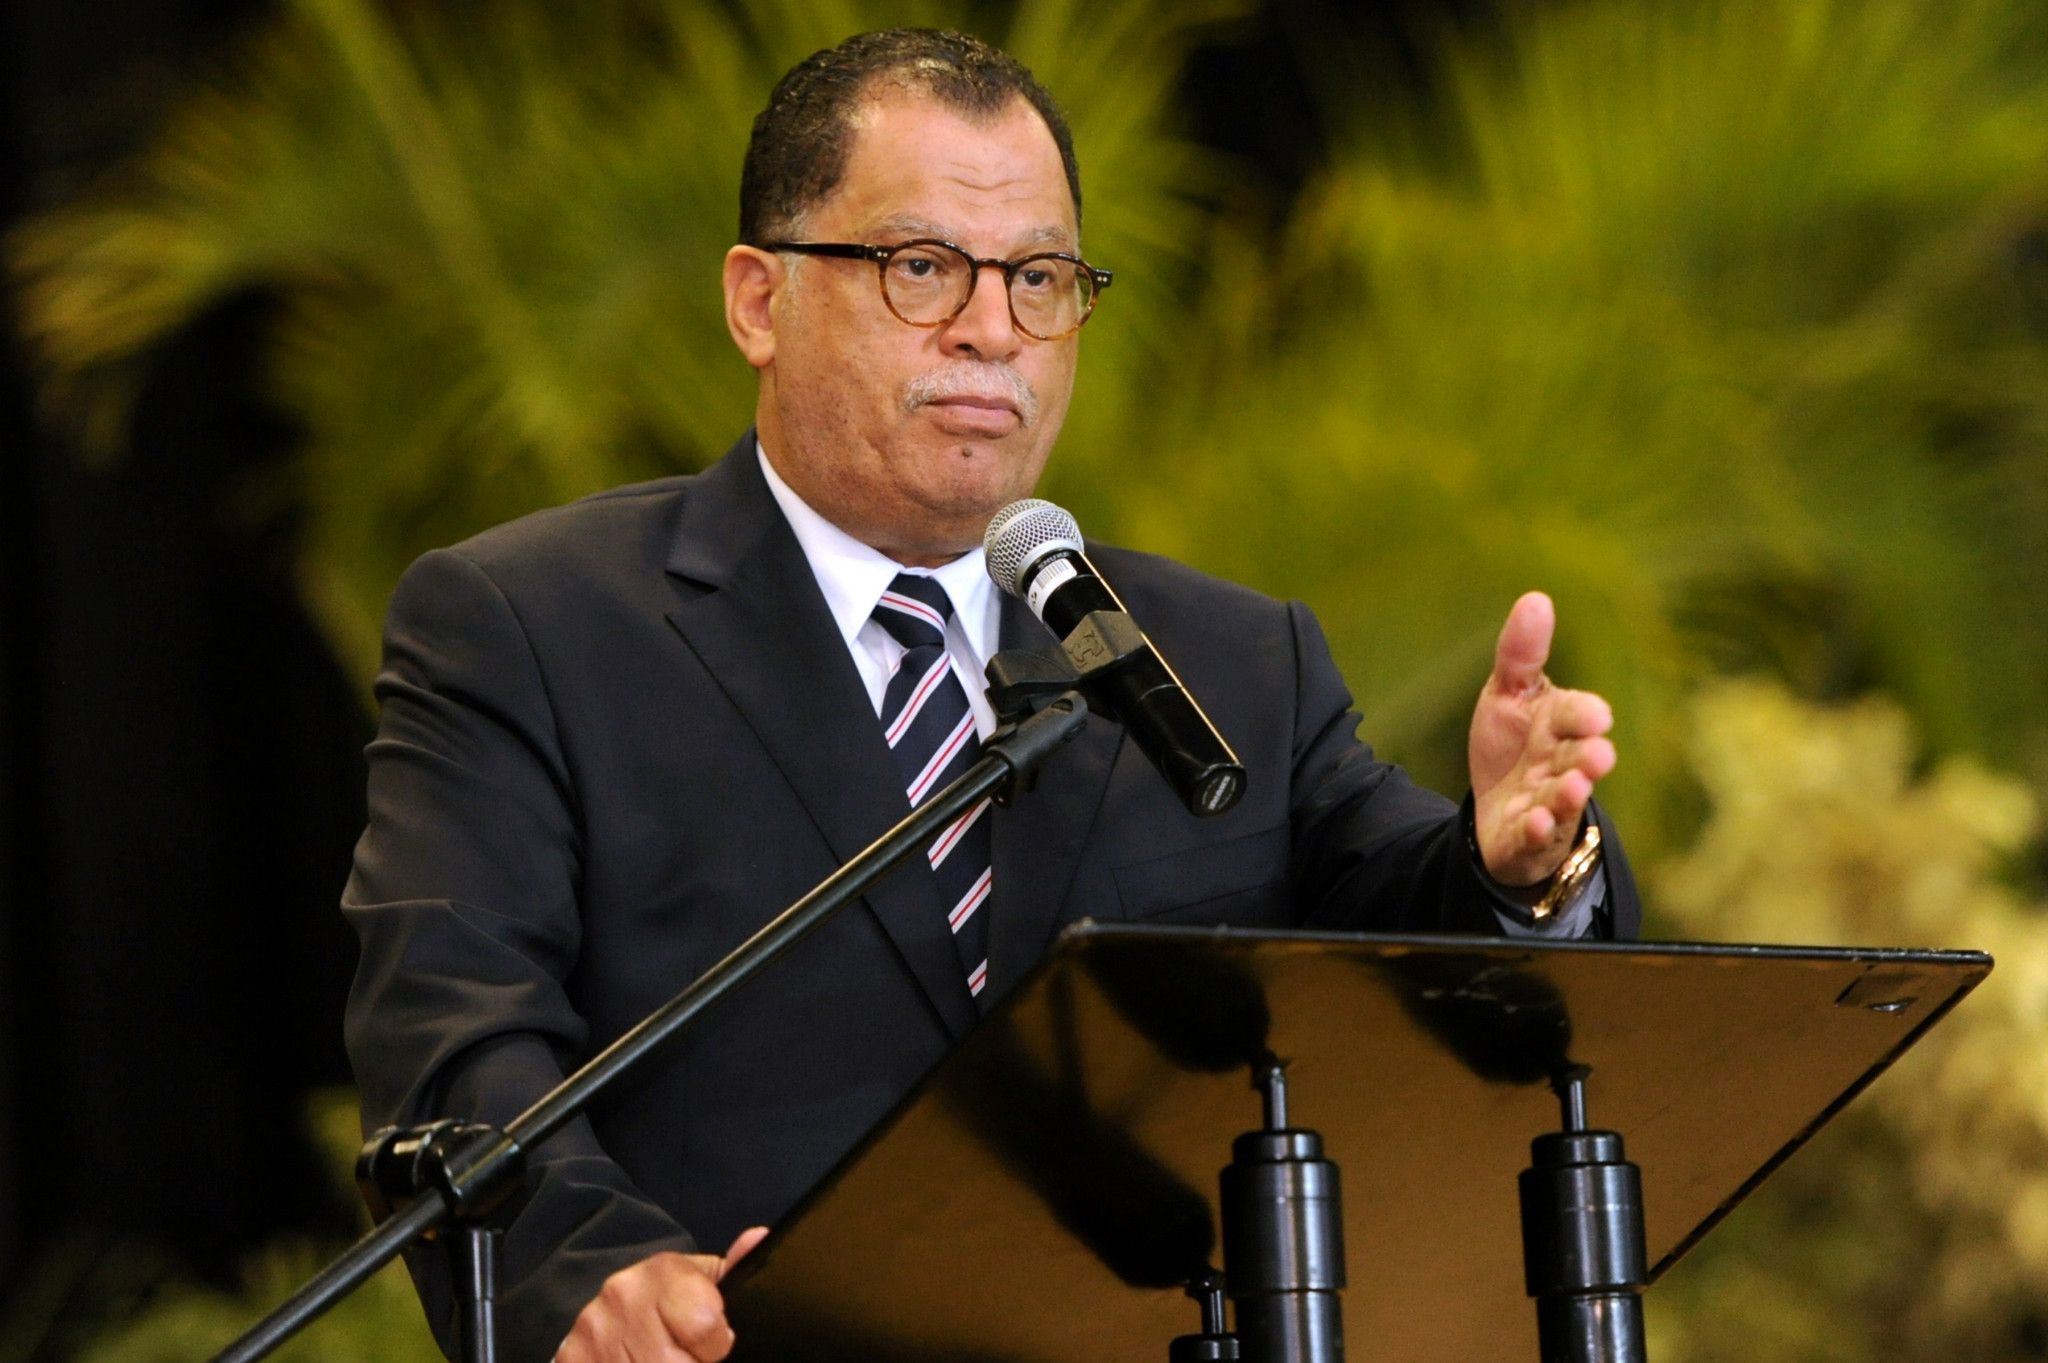 Jordaan loses third attempt to sit on FIFA Council